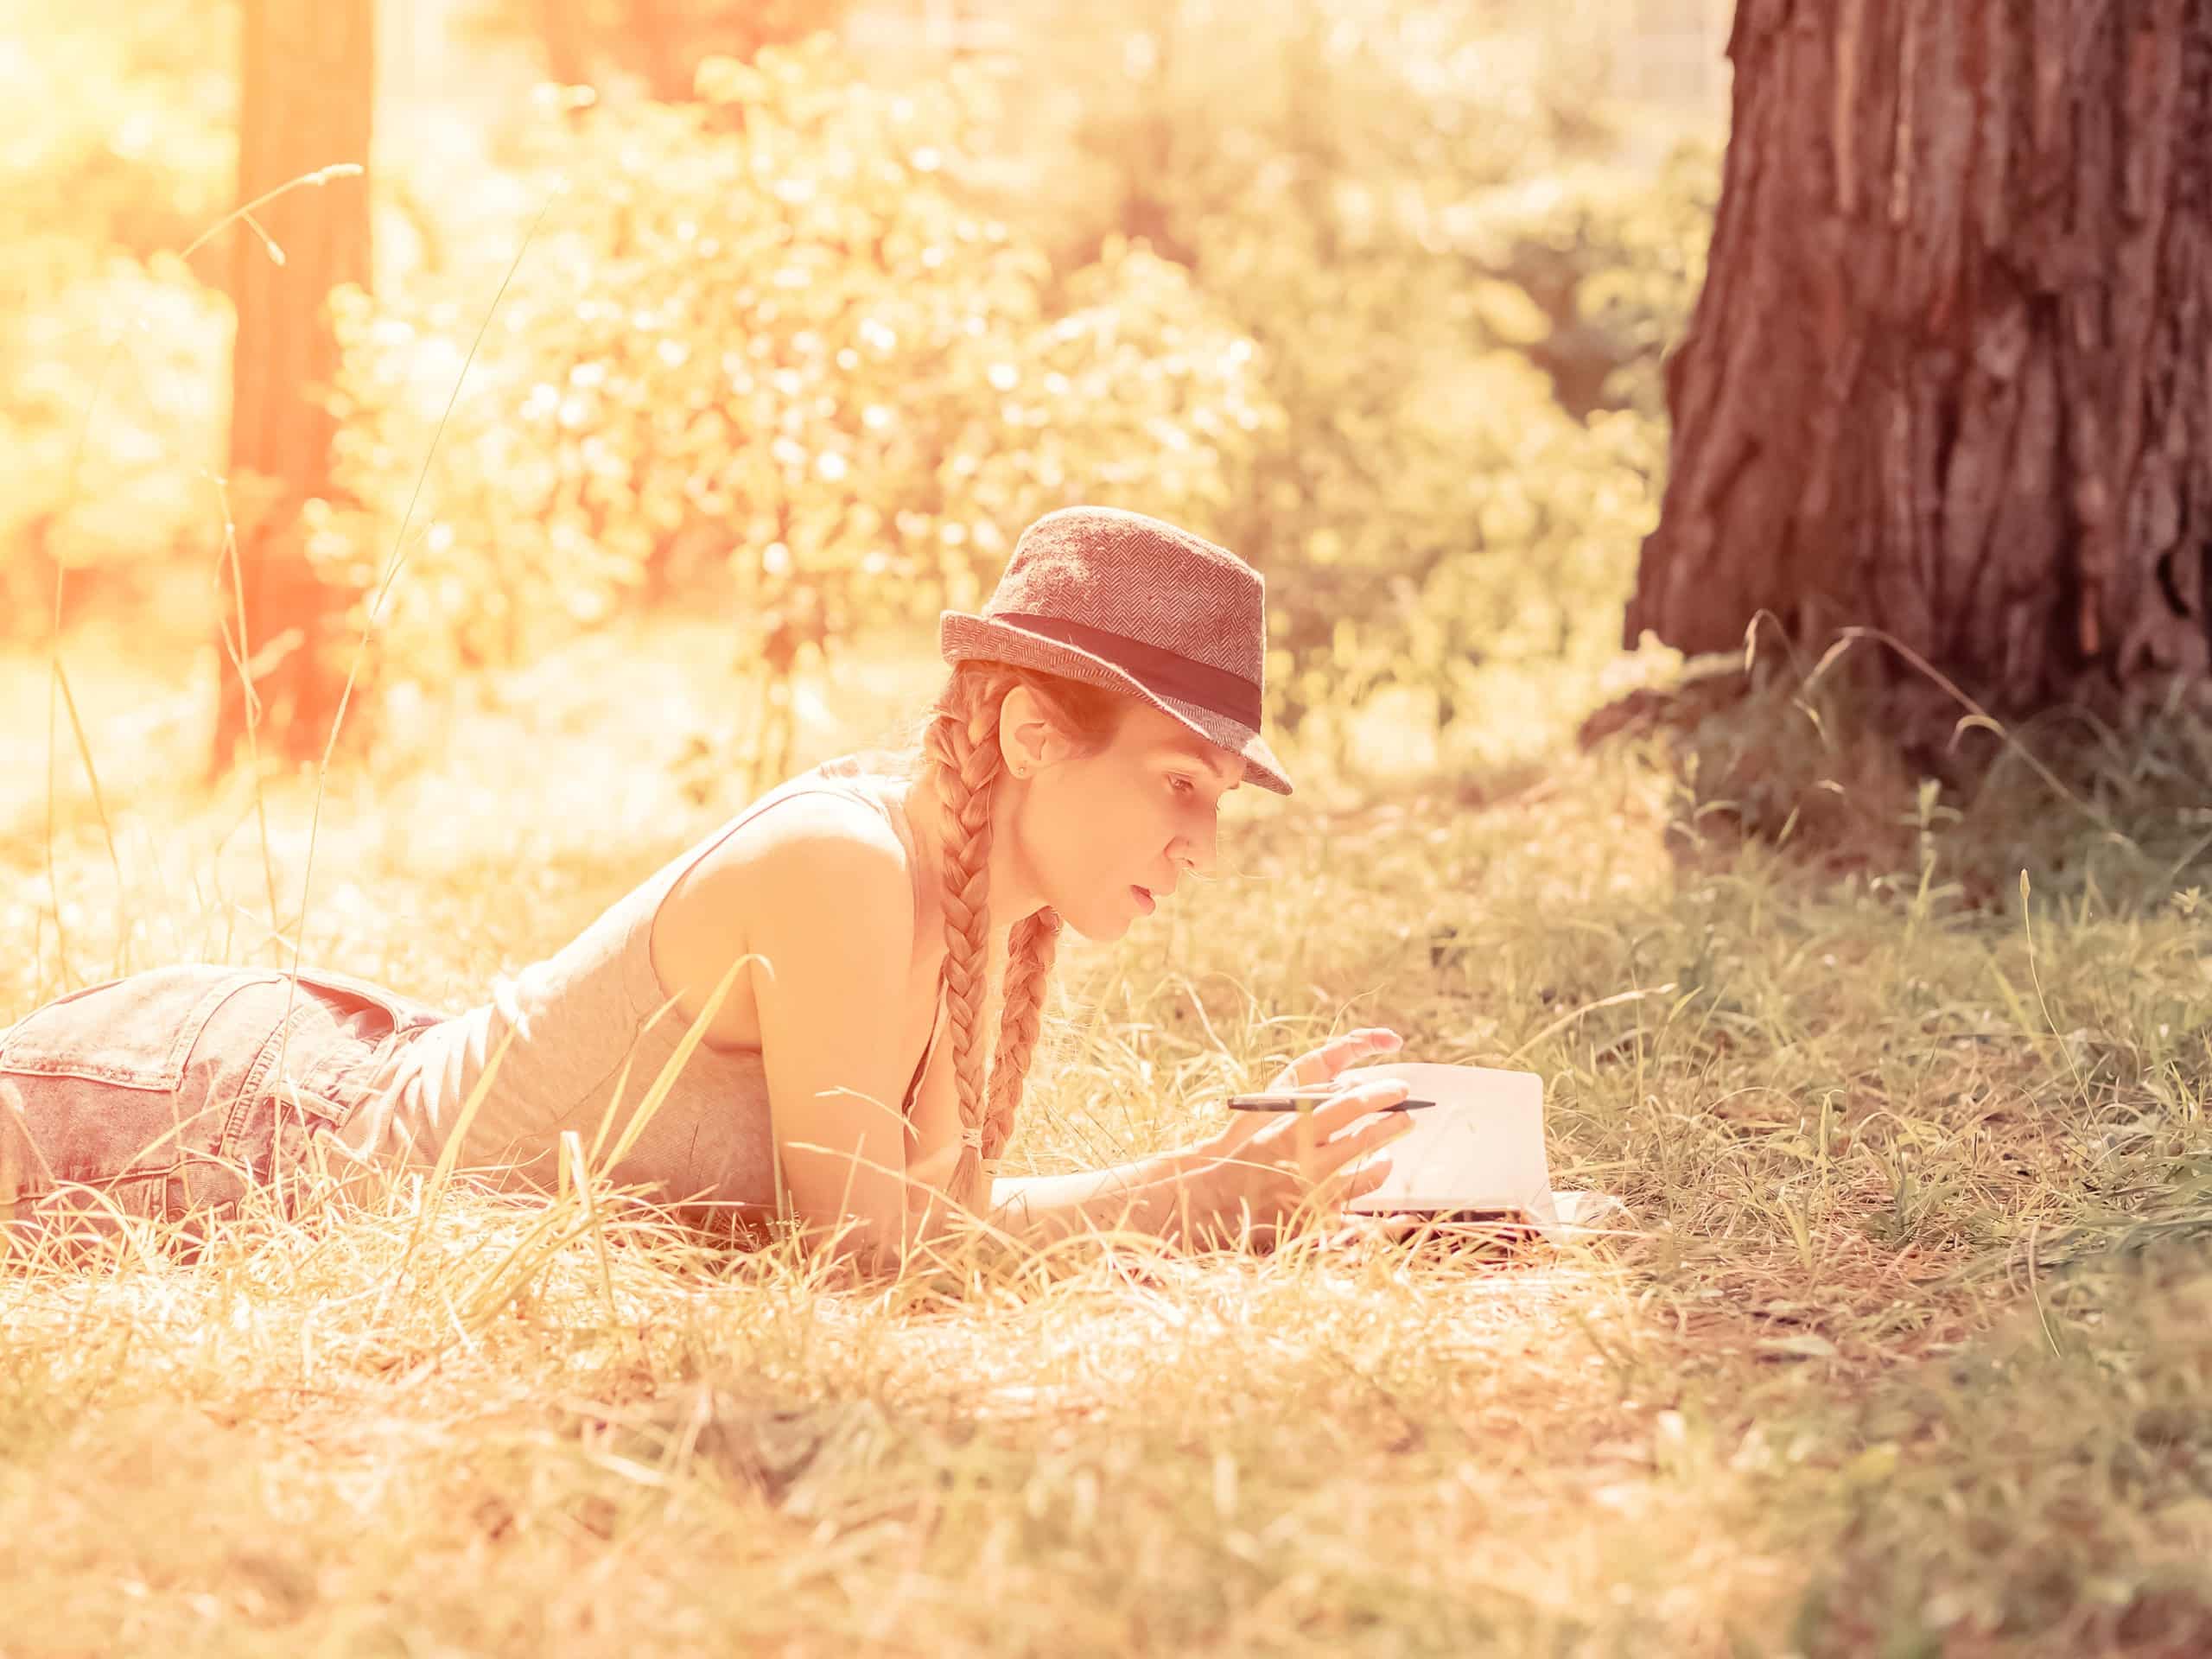 Blonde girl in a hat with two pigtails lies in the grass in a sunny forest writes in her notebook.